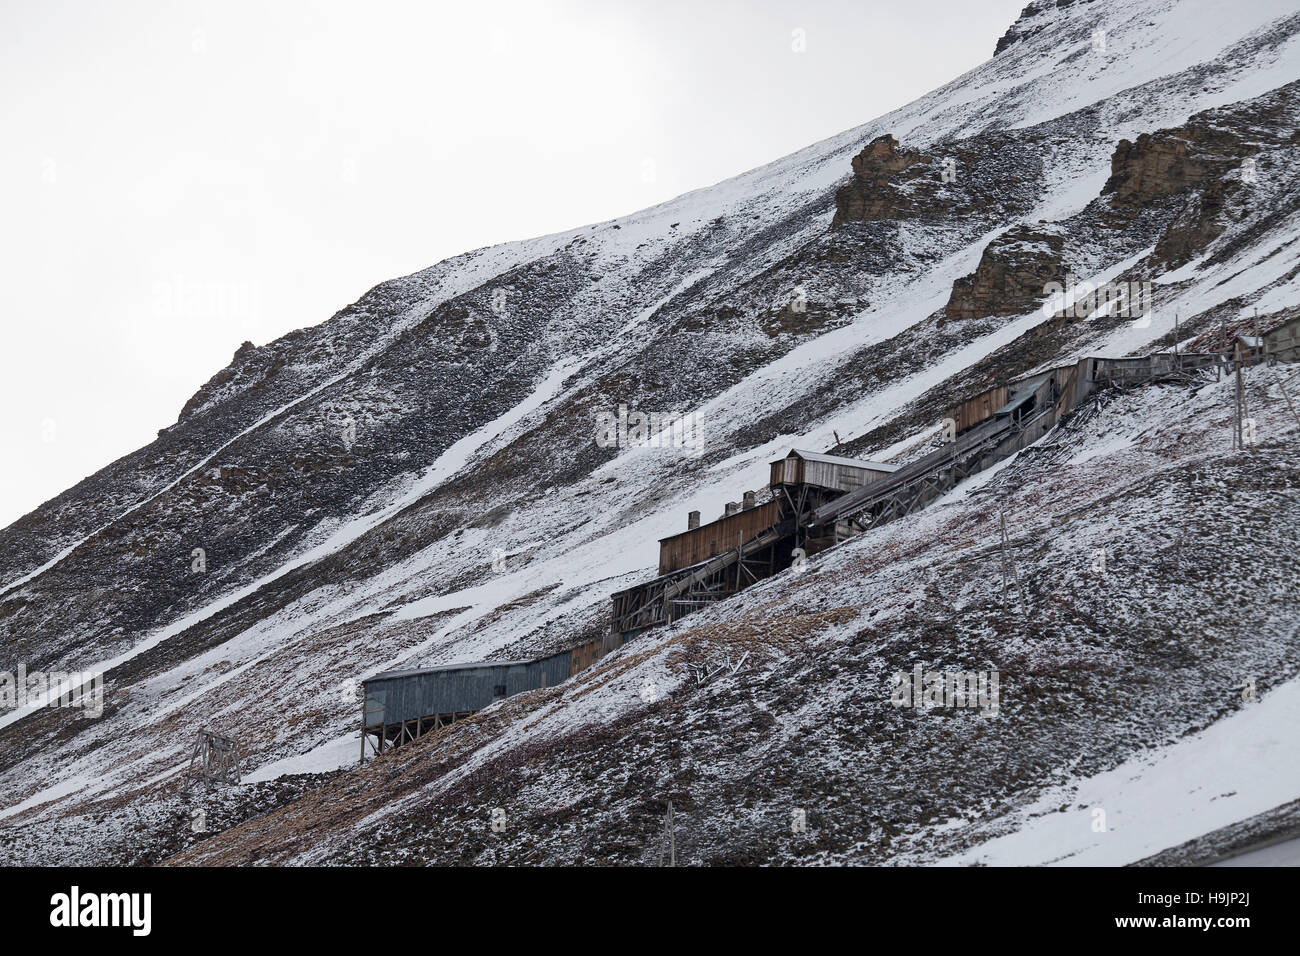 Dilapidated buildings of abandoned former coal mine at Longyearbyen, Svalbard / Spitsbergen Stock Photo